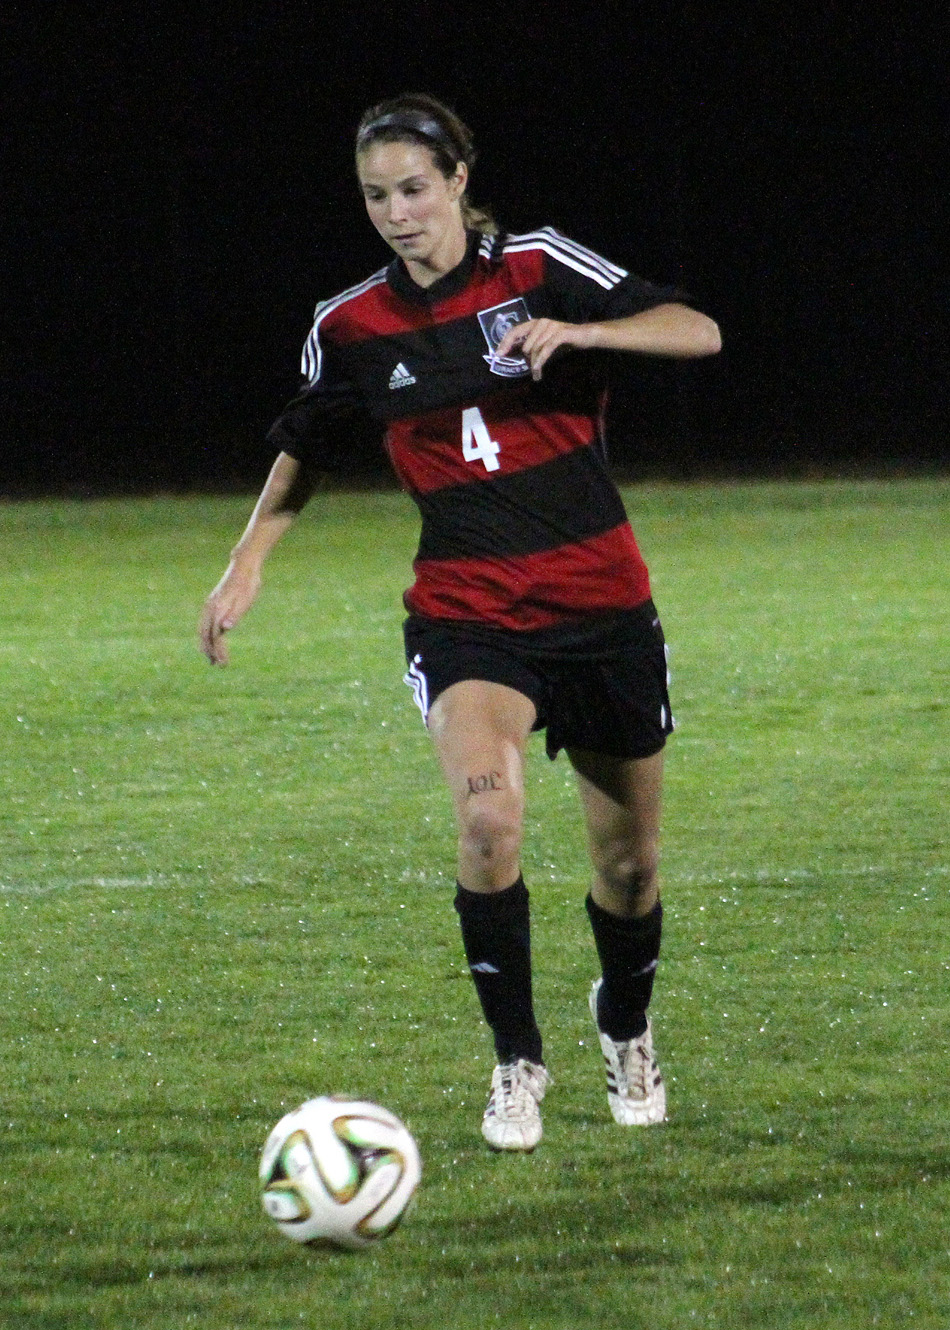 Grace College forward Mallory Rondeau netted a hat trick to help Grace beat Goshen Tuesday night. (File photo provided by the Grace College Sports Information Department)